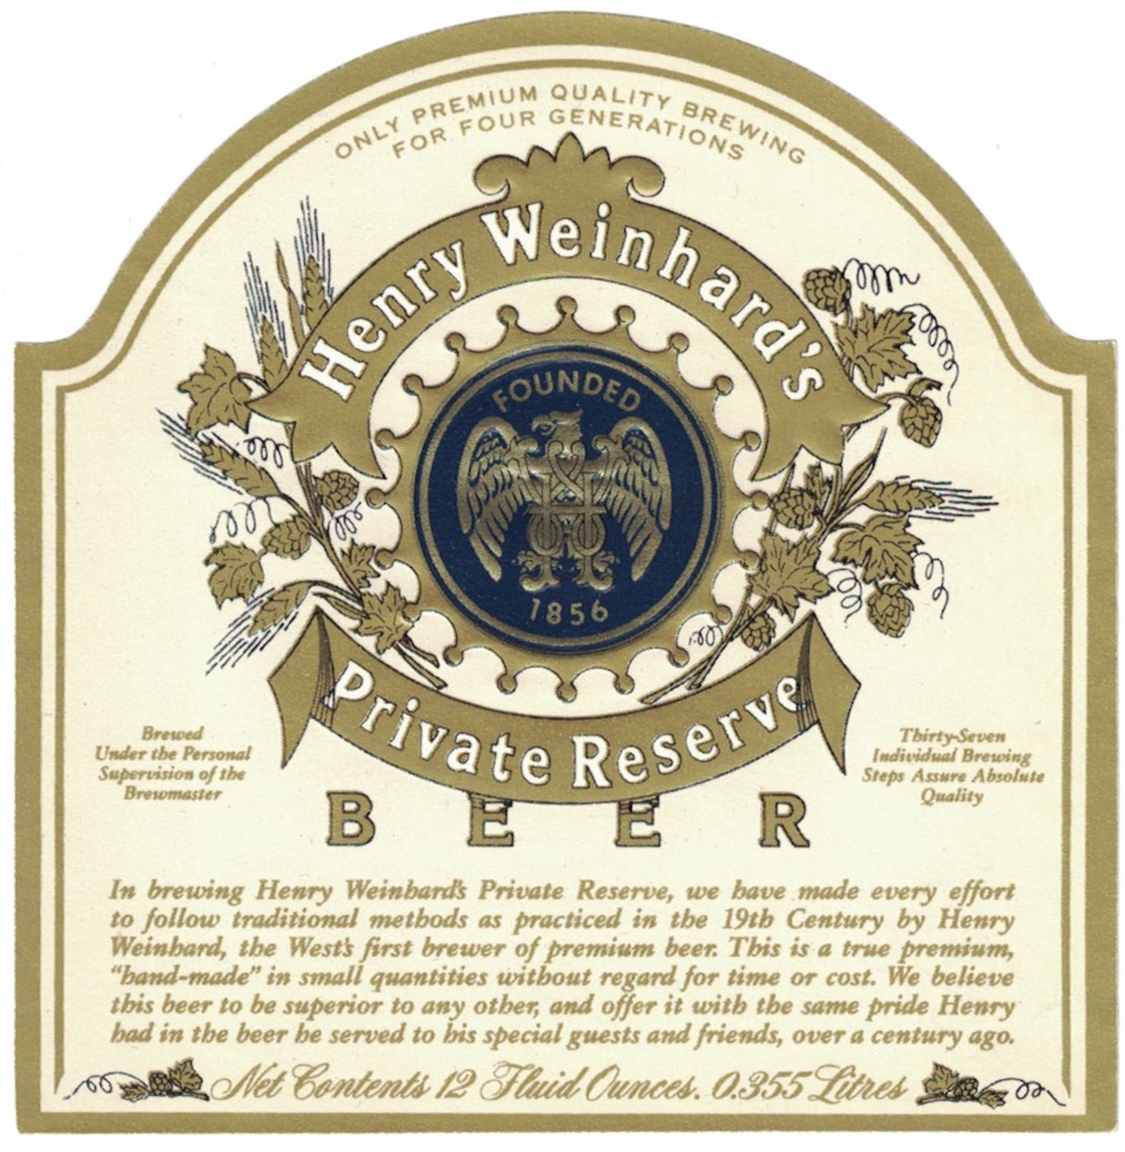 Henry Weinhard's Private Reserve Beer Label